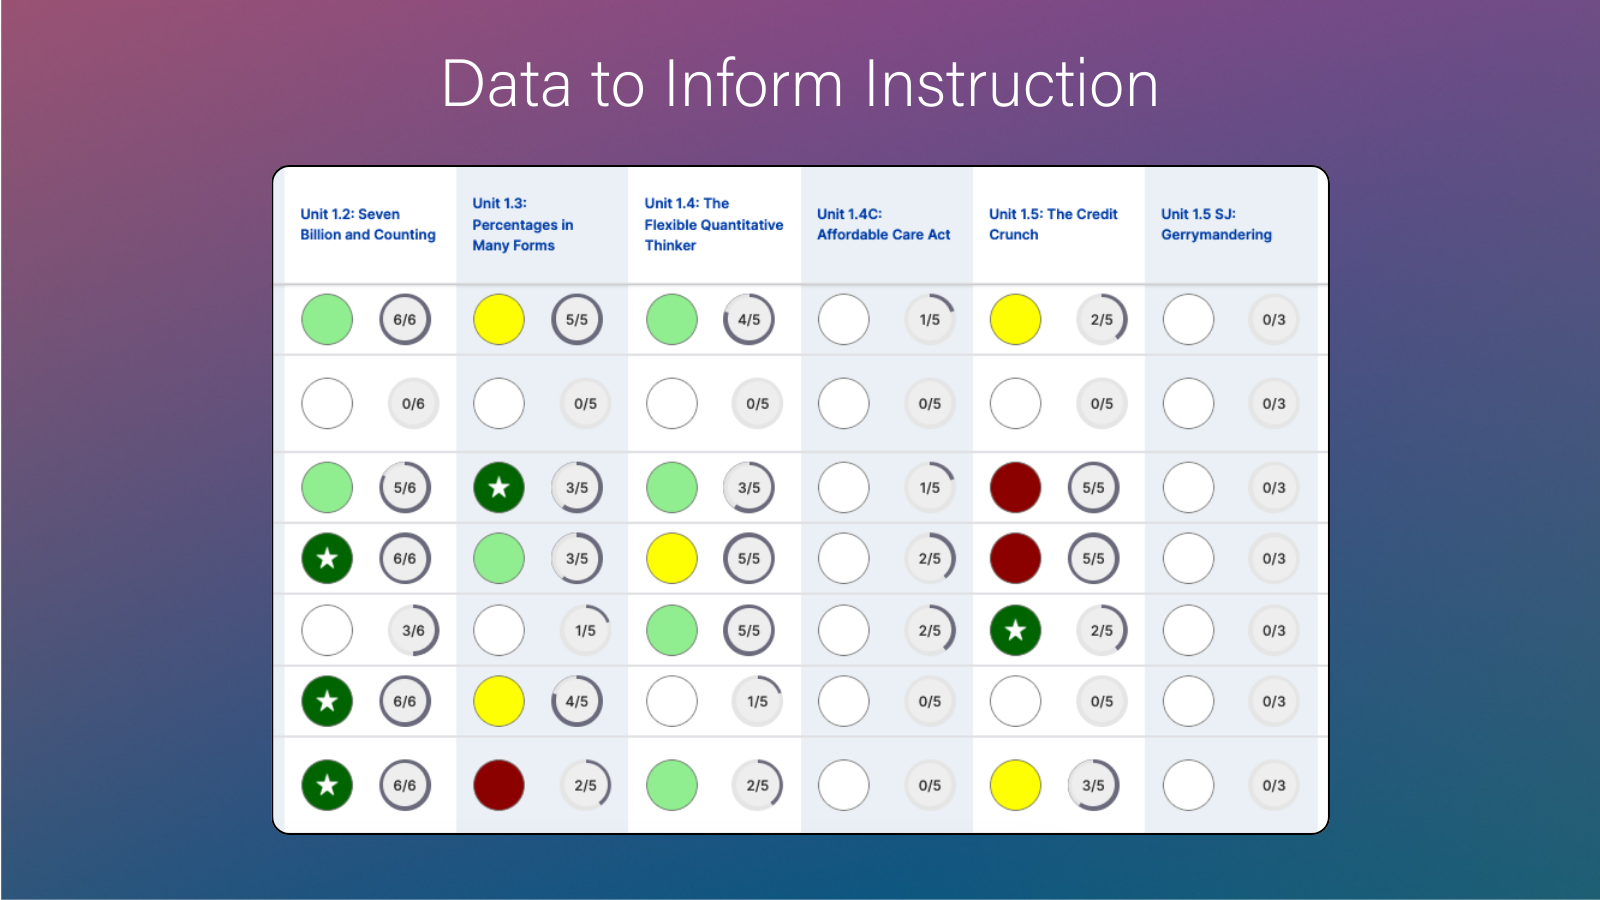 Image entitled Data to Inform Instruction. Shows a screenshot of a comprehensive view of student performance data across multiple units in the course.